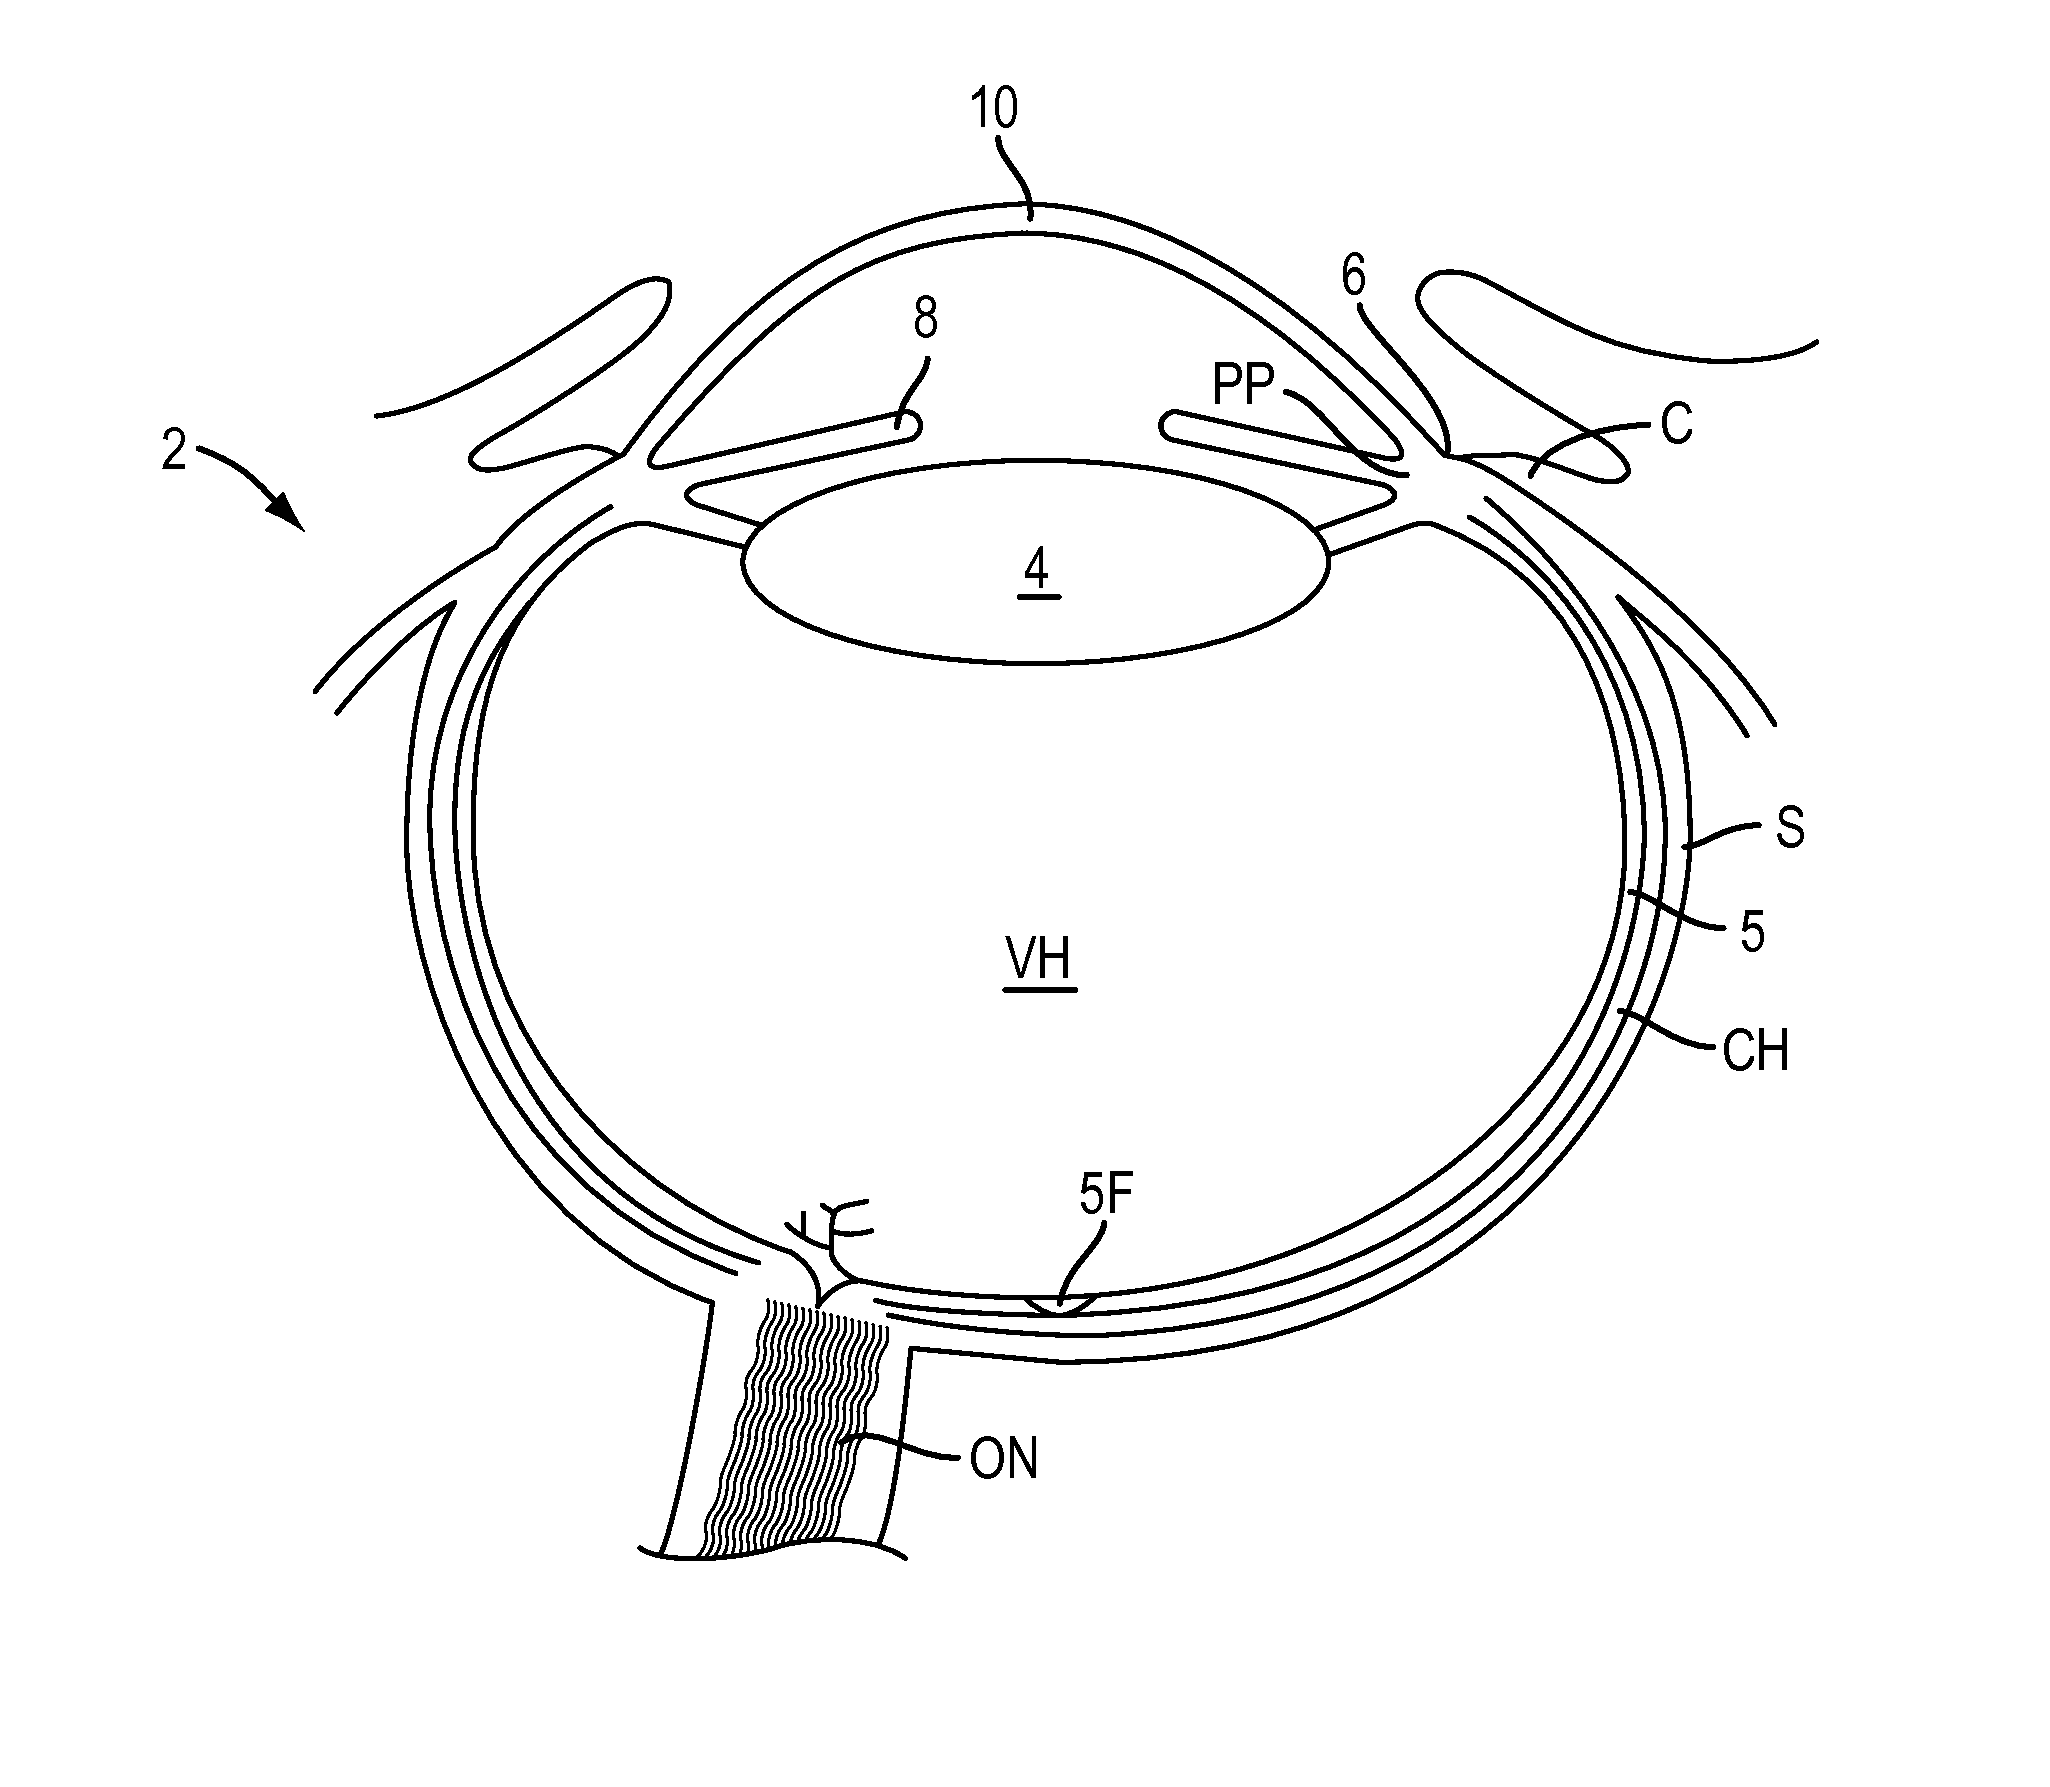 Eye covering and refractive correction methods and apparatus having improved tear flow, comfort, and/or applicability